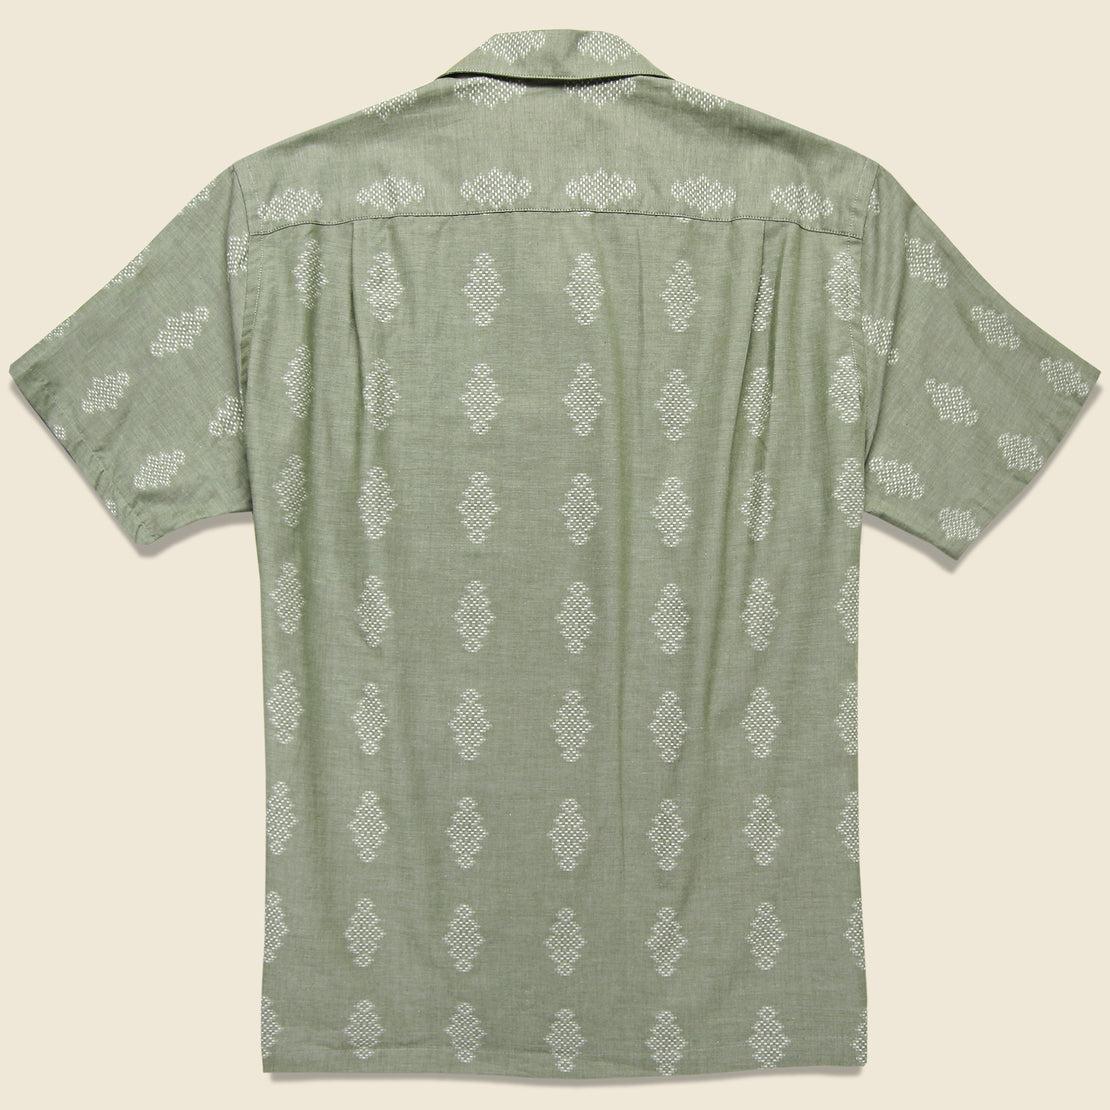 Bunch Shirt - Pale Green - Portuguese Flannel - STAG Provisions - Tops - S/S Woven - Other Pattern